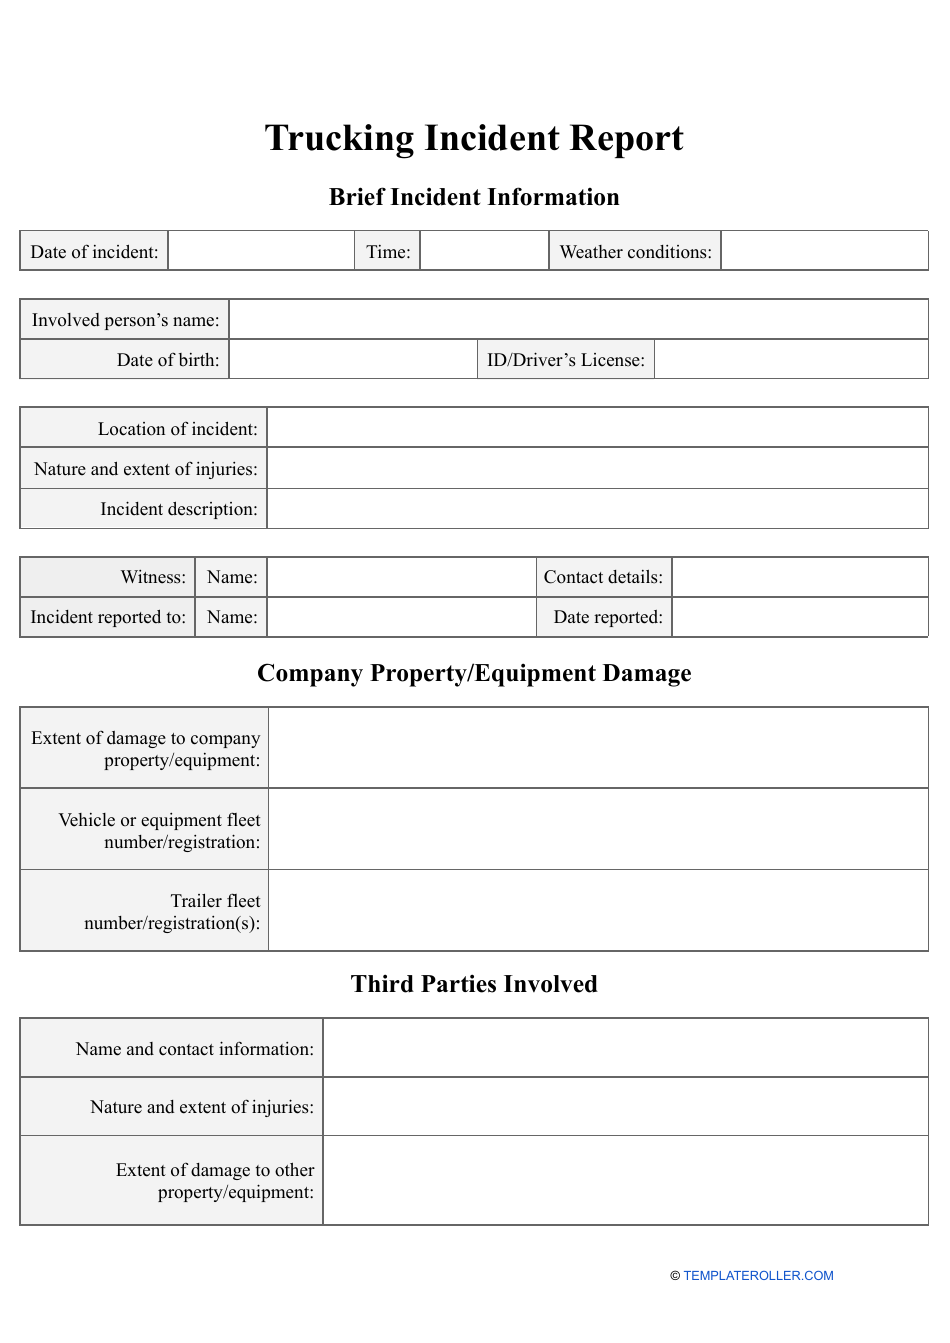 Trucking Incident Report Template, Page 1